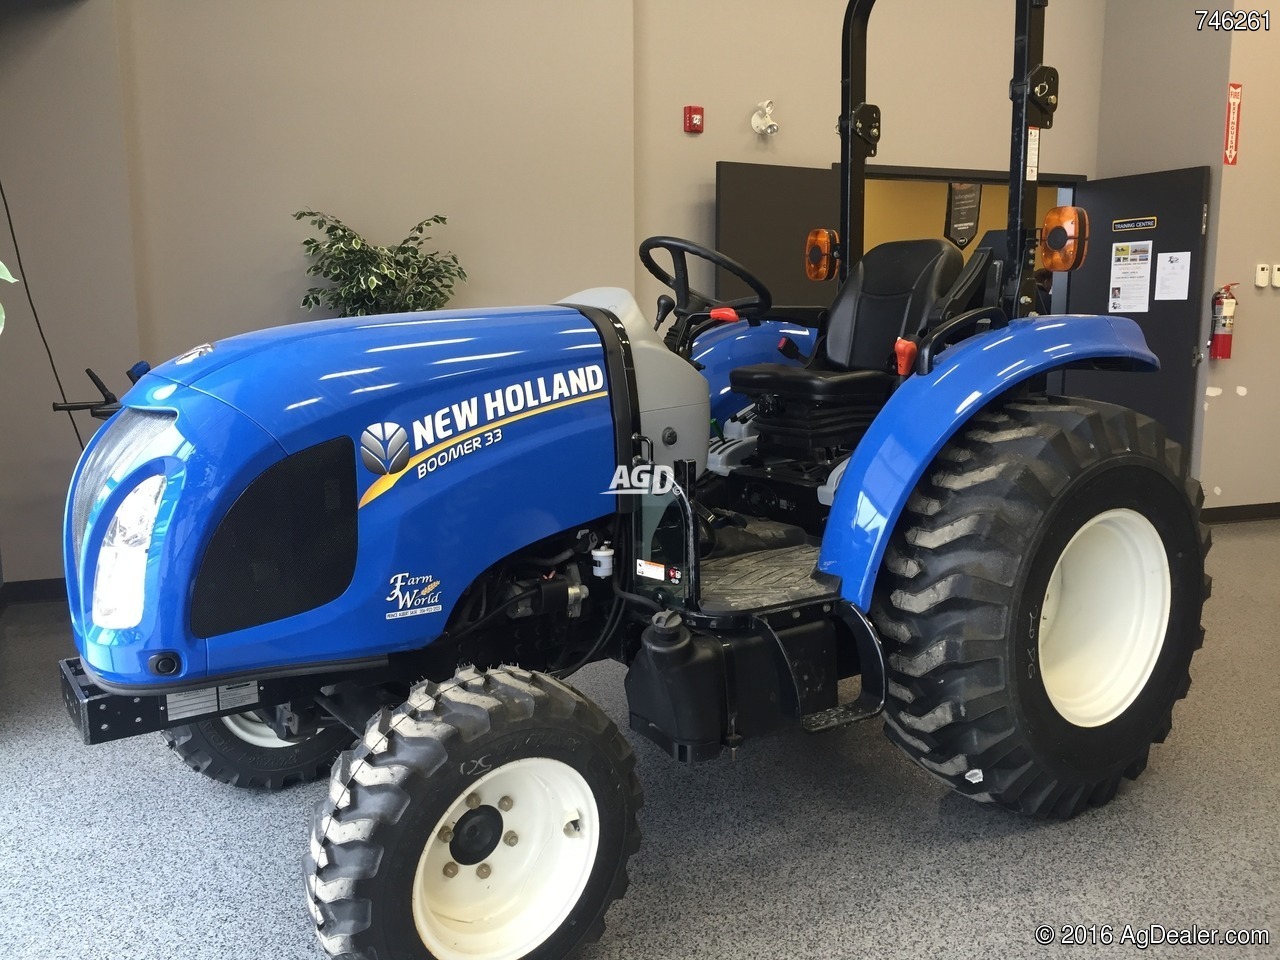 New Holland BOOMER 33 W/LOADER - $315/MONTH, 0% FOR 60 MONTH Tractor ...